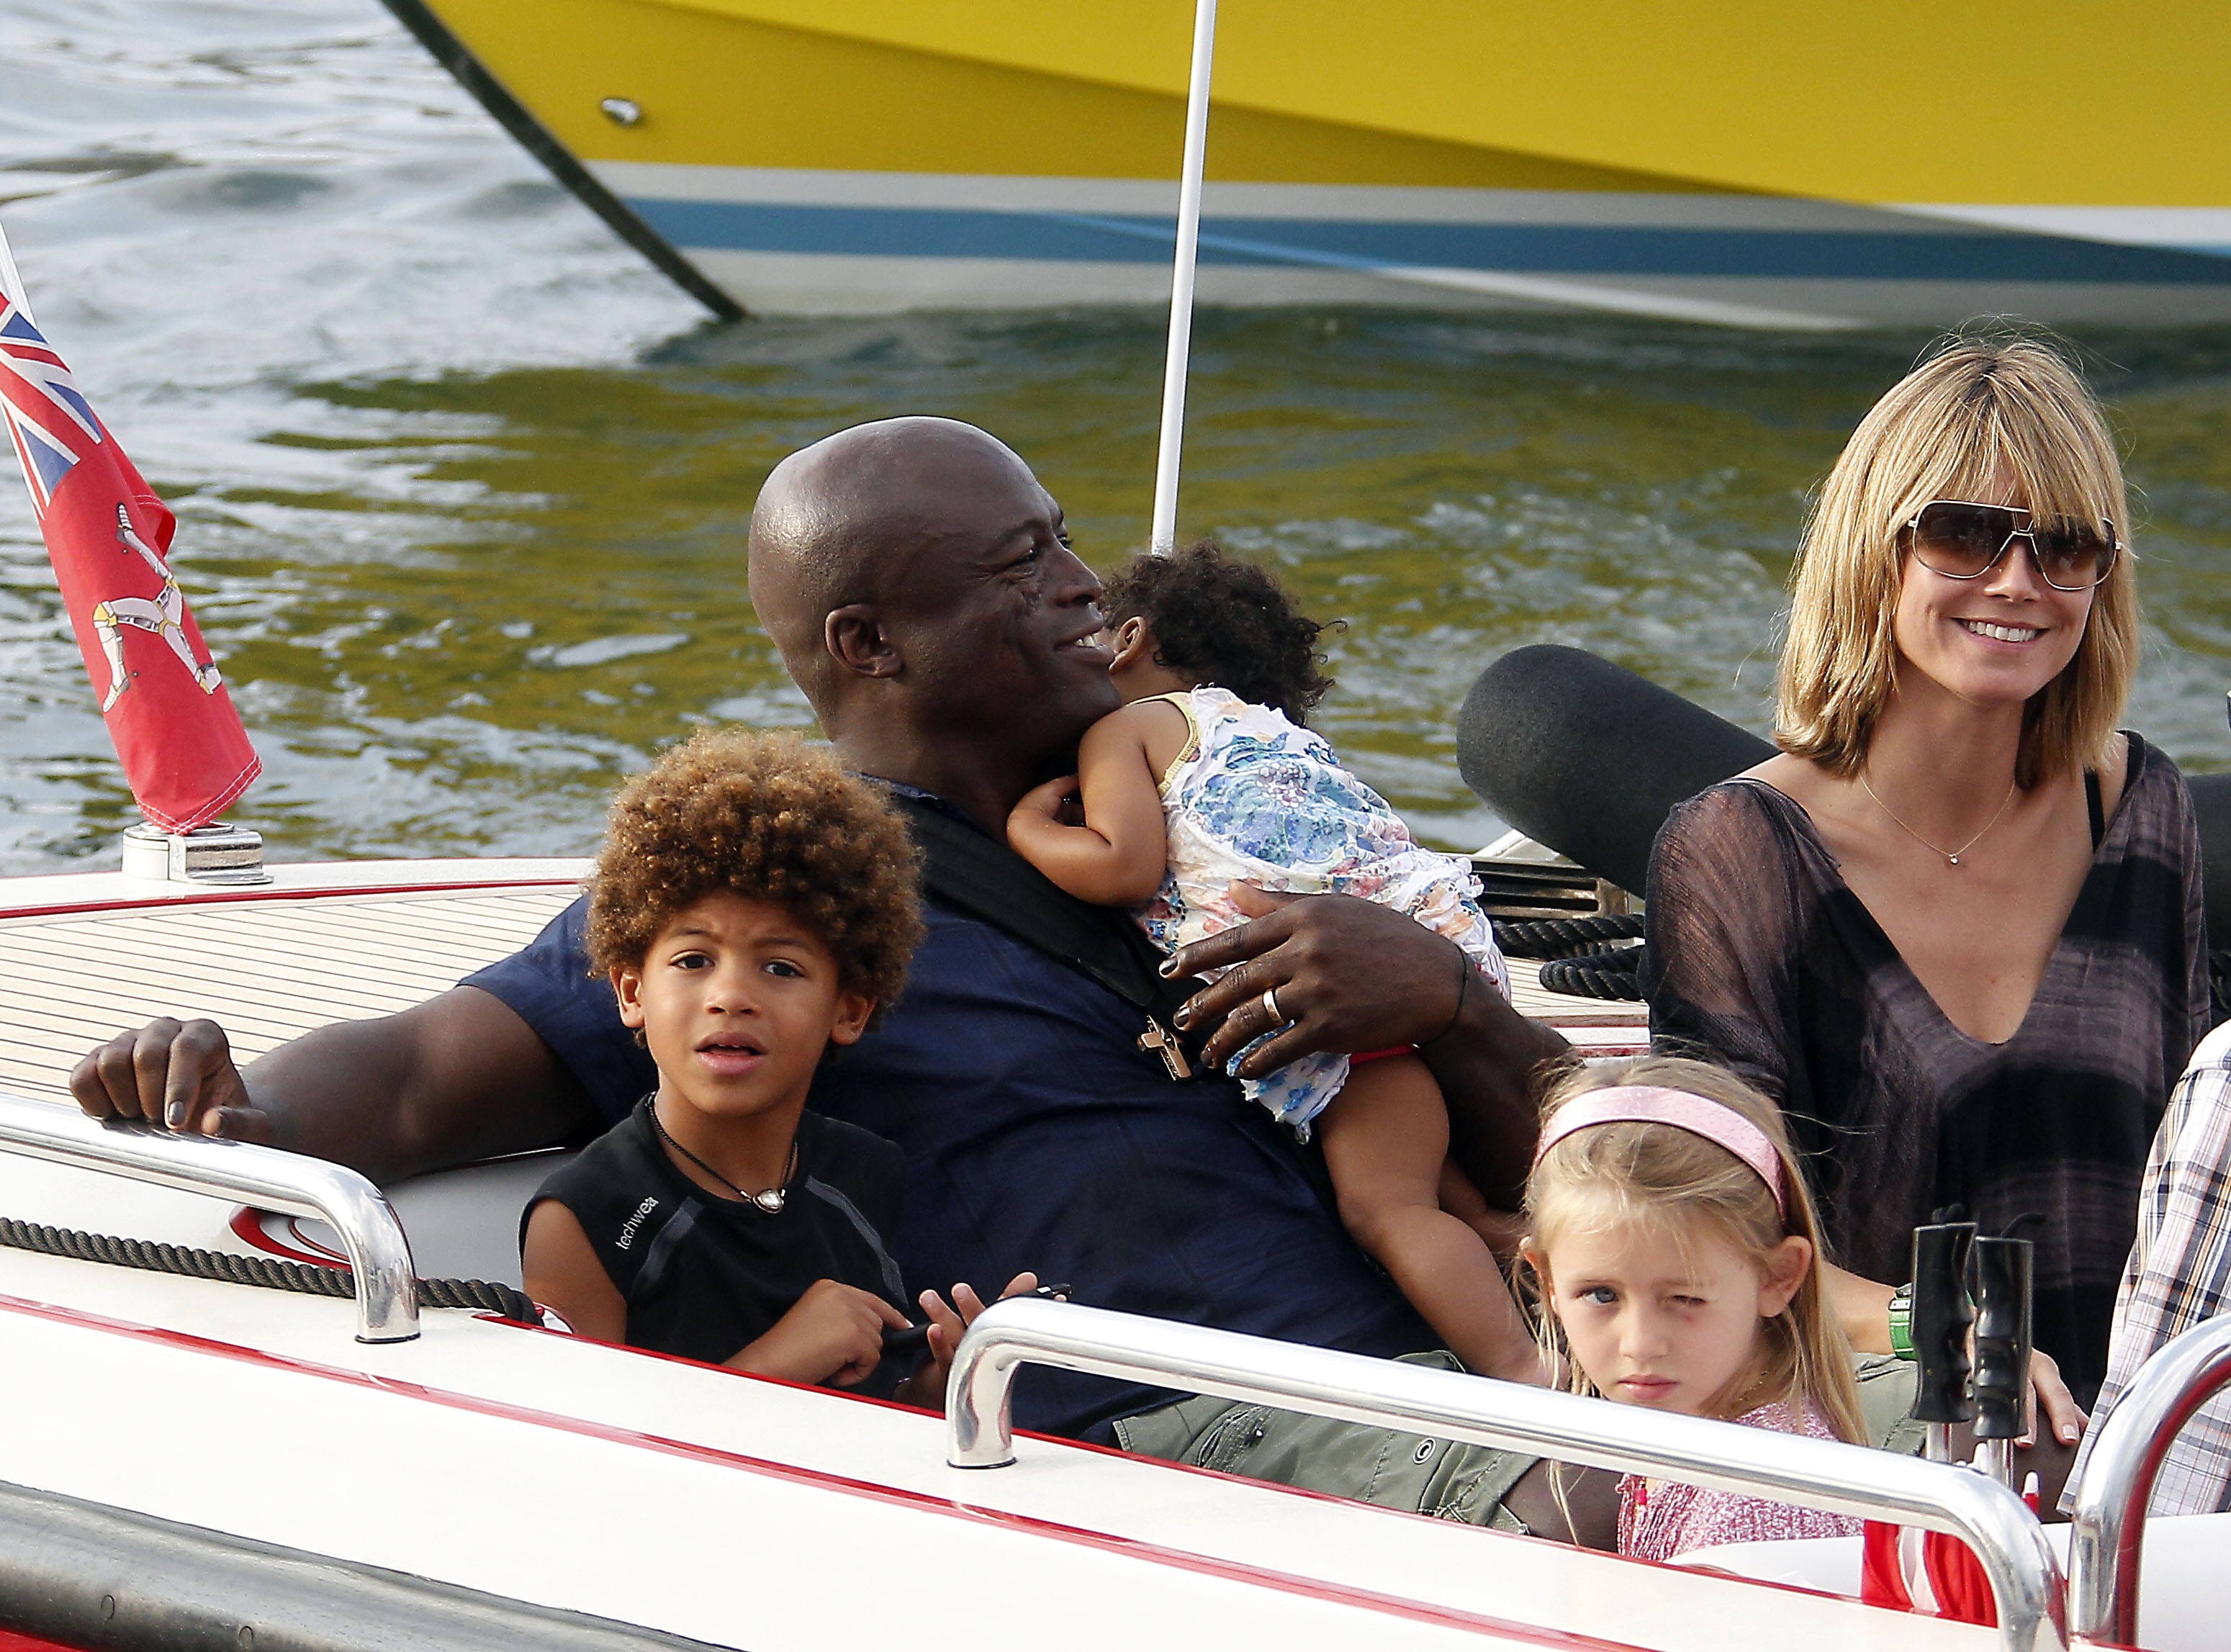 Heidi Klum and Seal in France with their children in 2010 | Source: Getty images